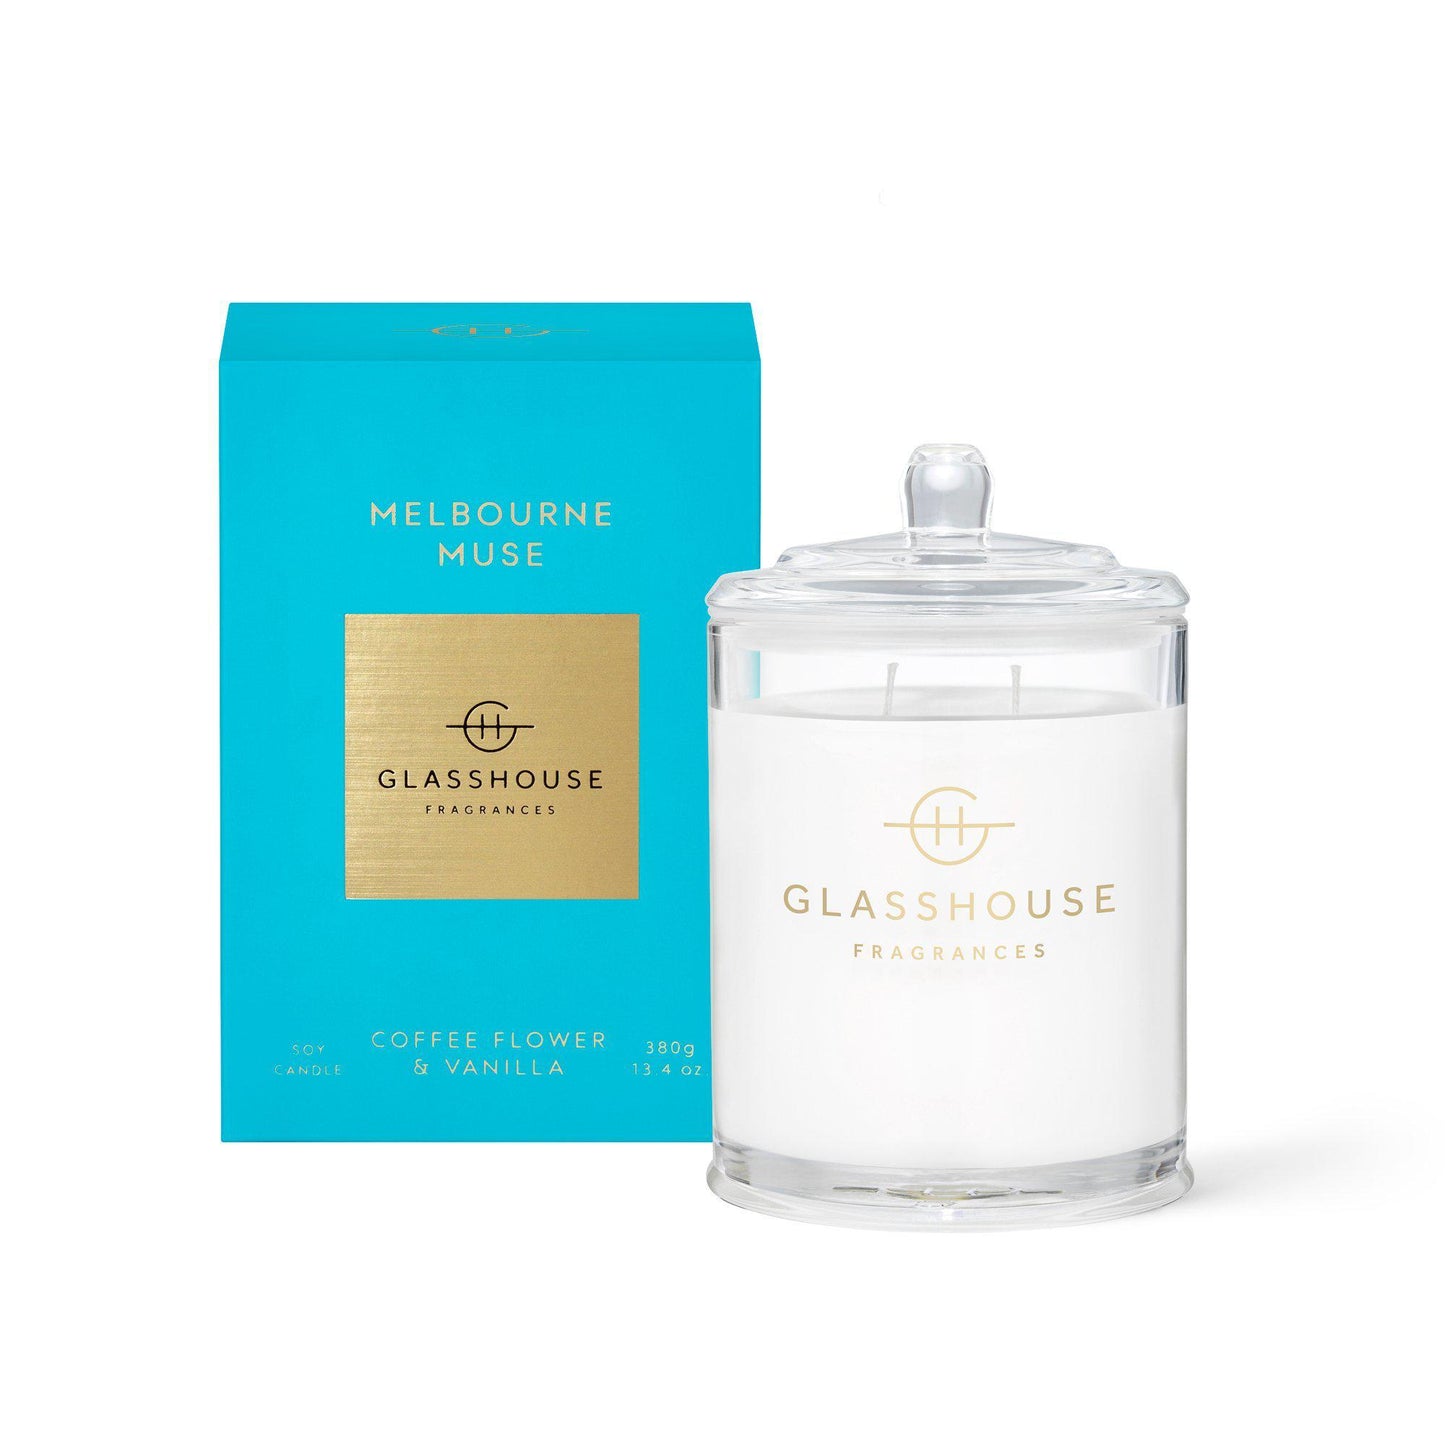 Candle 380g - Melbourne Muse - Glasshouse Fragrances - FUDGE Gifts Home Lifestyle